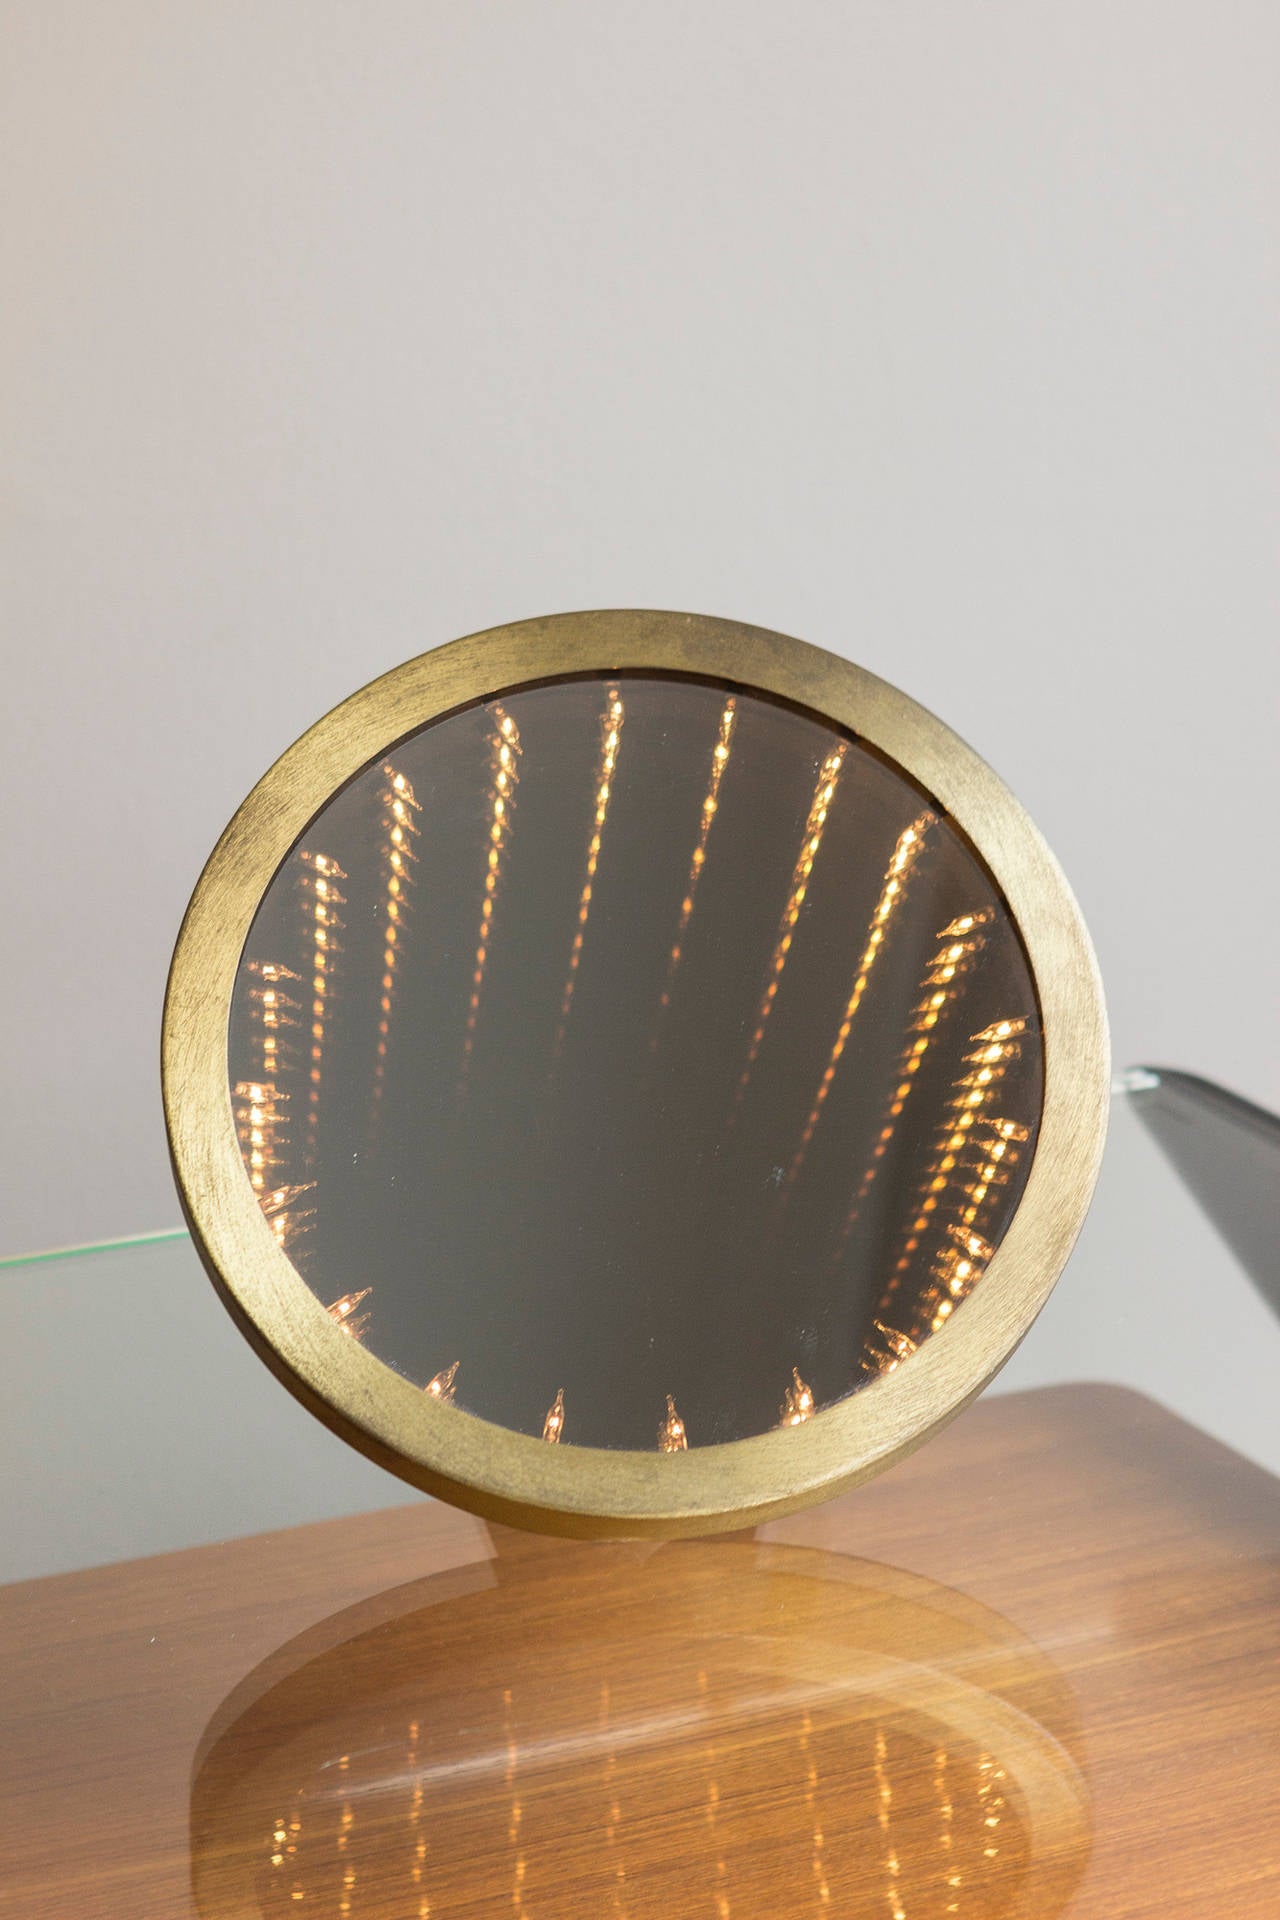 Rare Exceptional light kinetic mirror/ Infinity Mirror, brass frame, black lacquered metal and mirrored glass, with the effect of infinite depth.
Italy circa 1970 diameter 30 cm. Can use for a table light or wall light object.